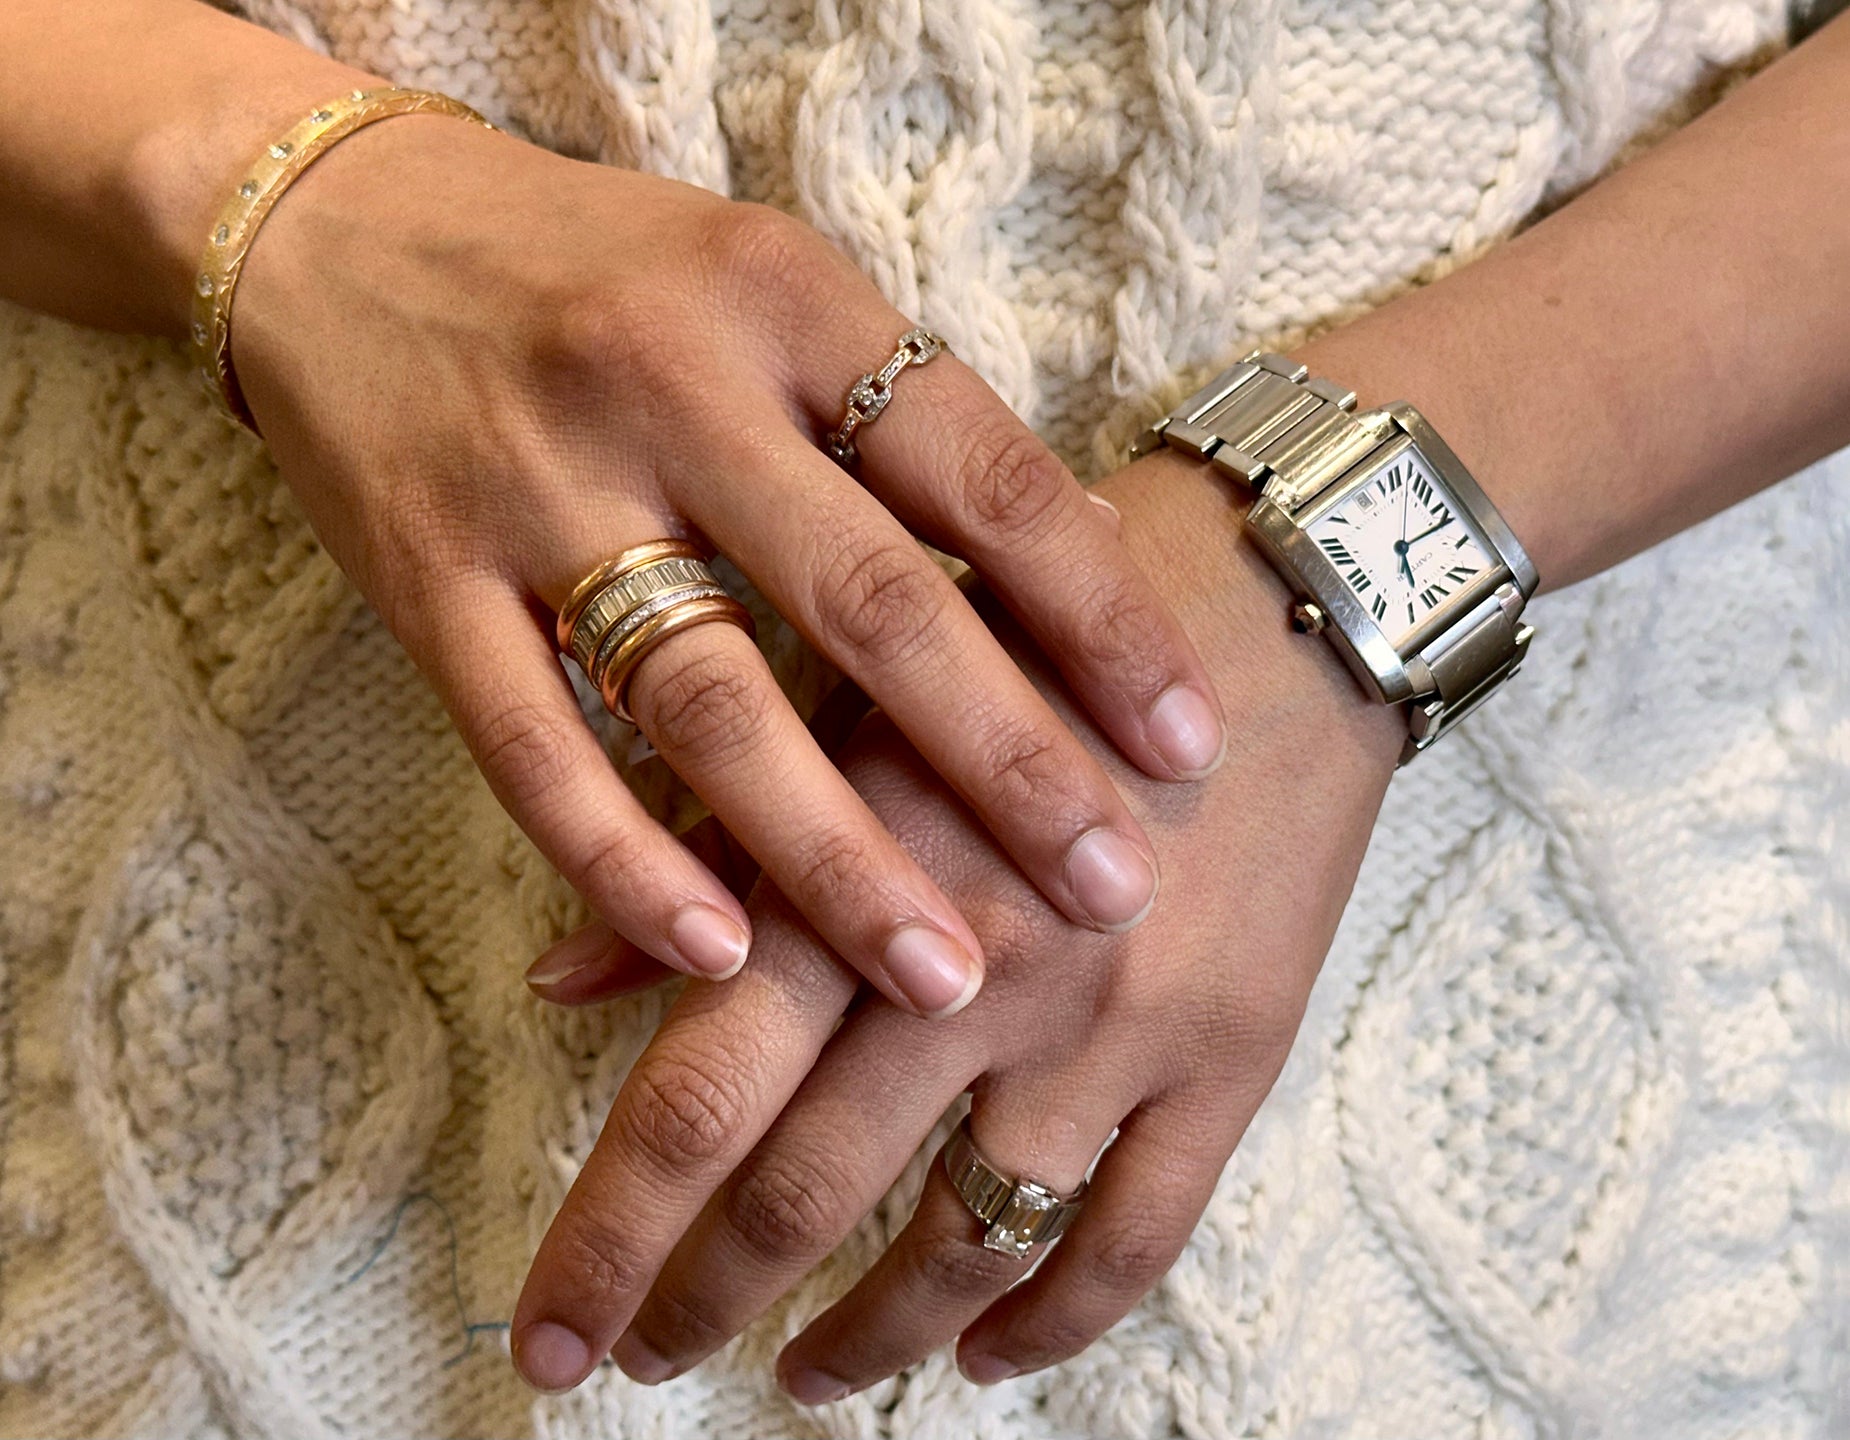 My Stack My Story: Prerna Sethi Commemorates Values & Dreams with Stacking Rings